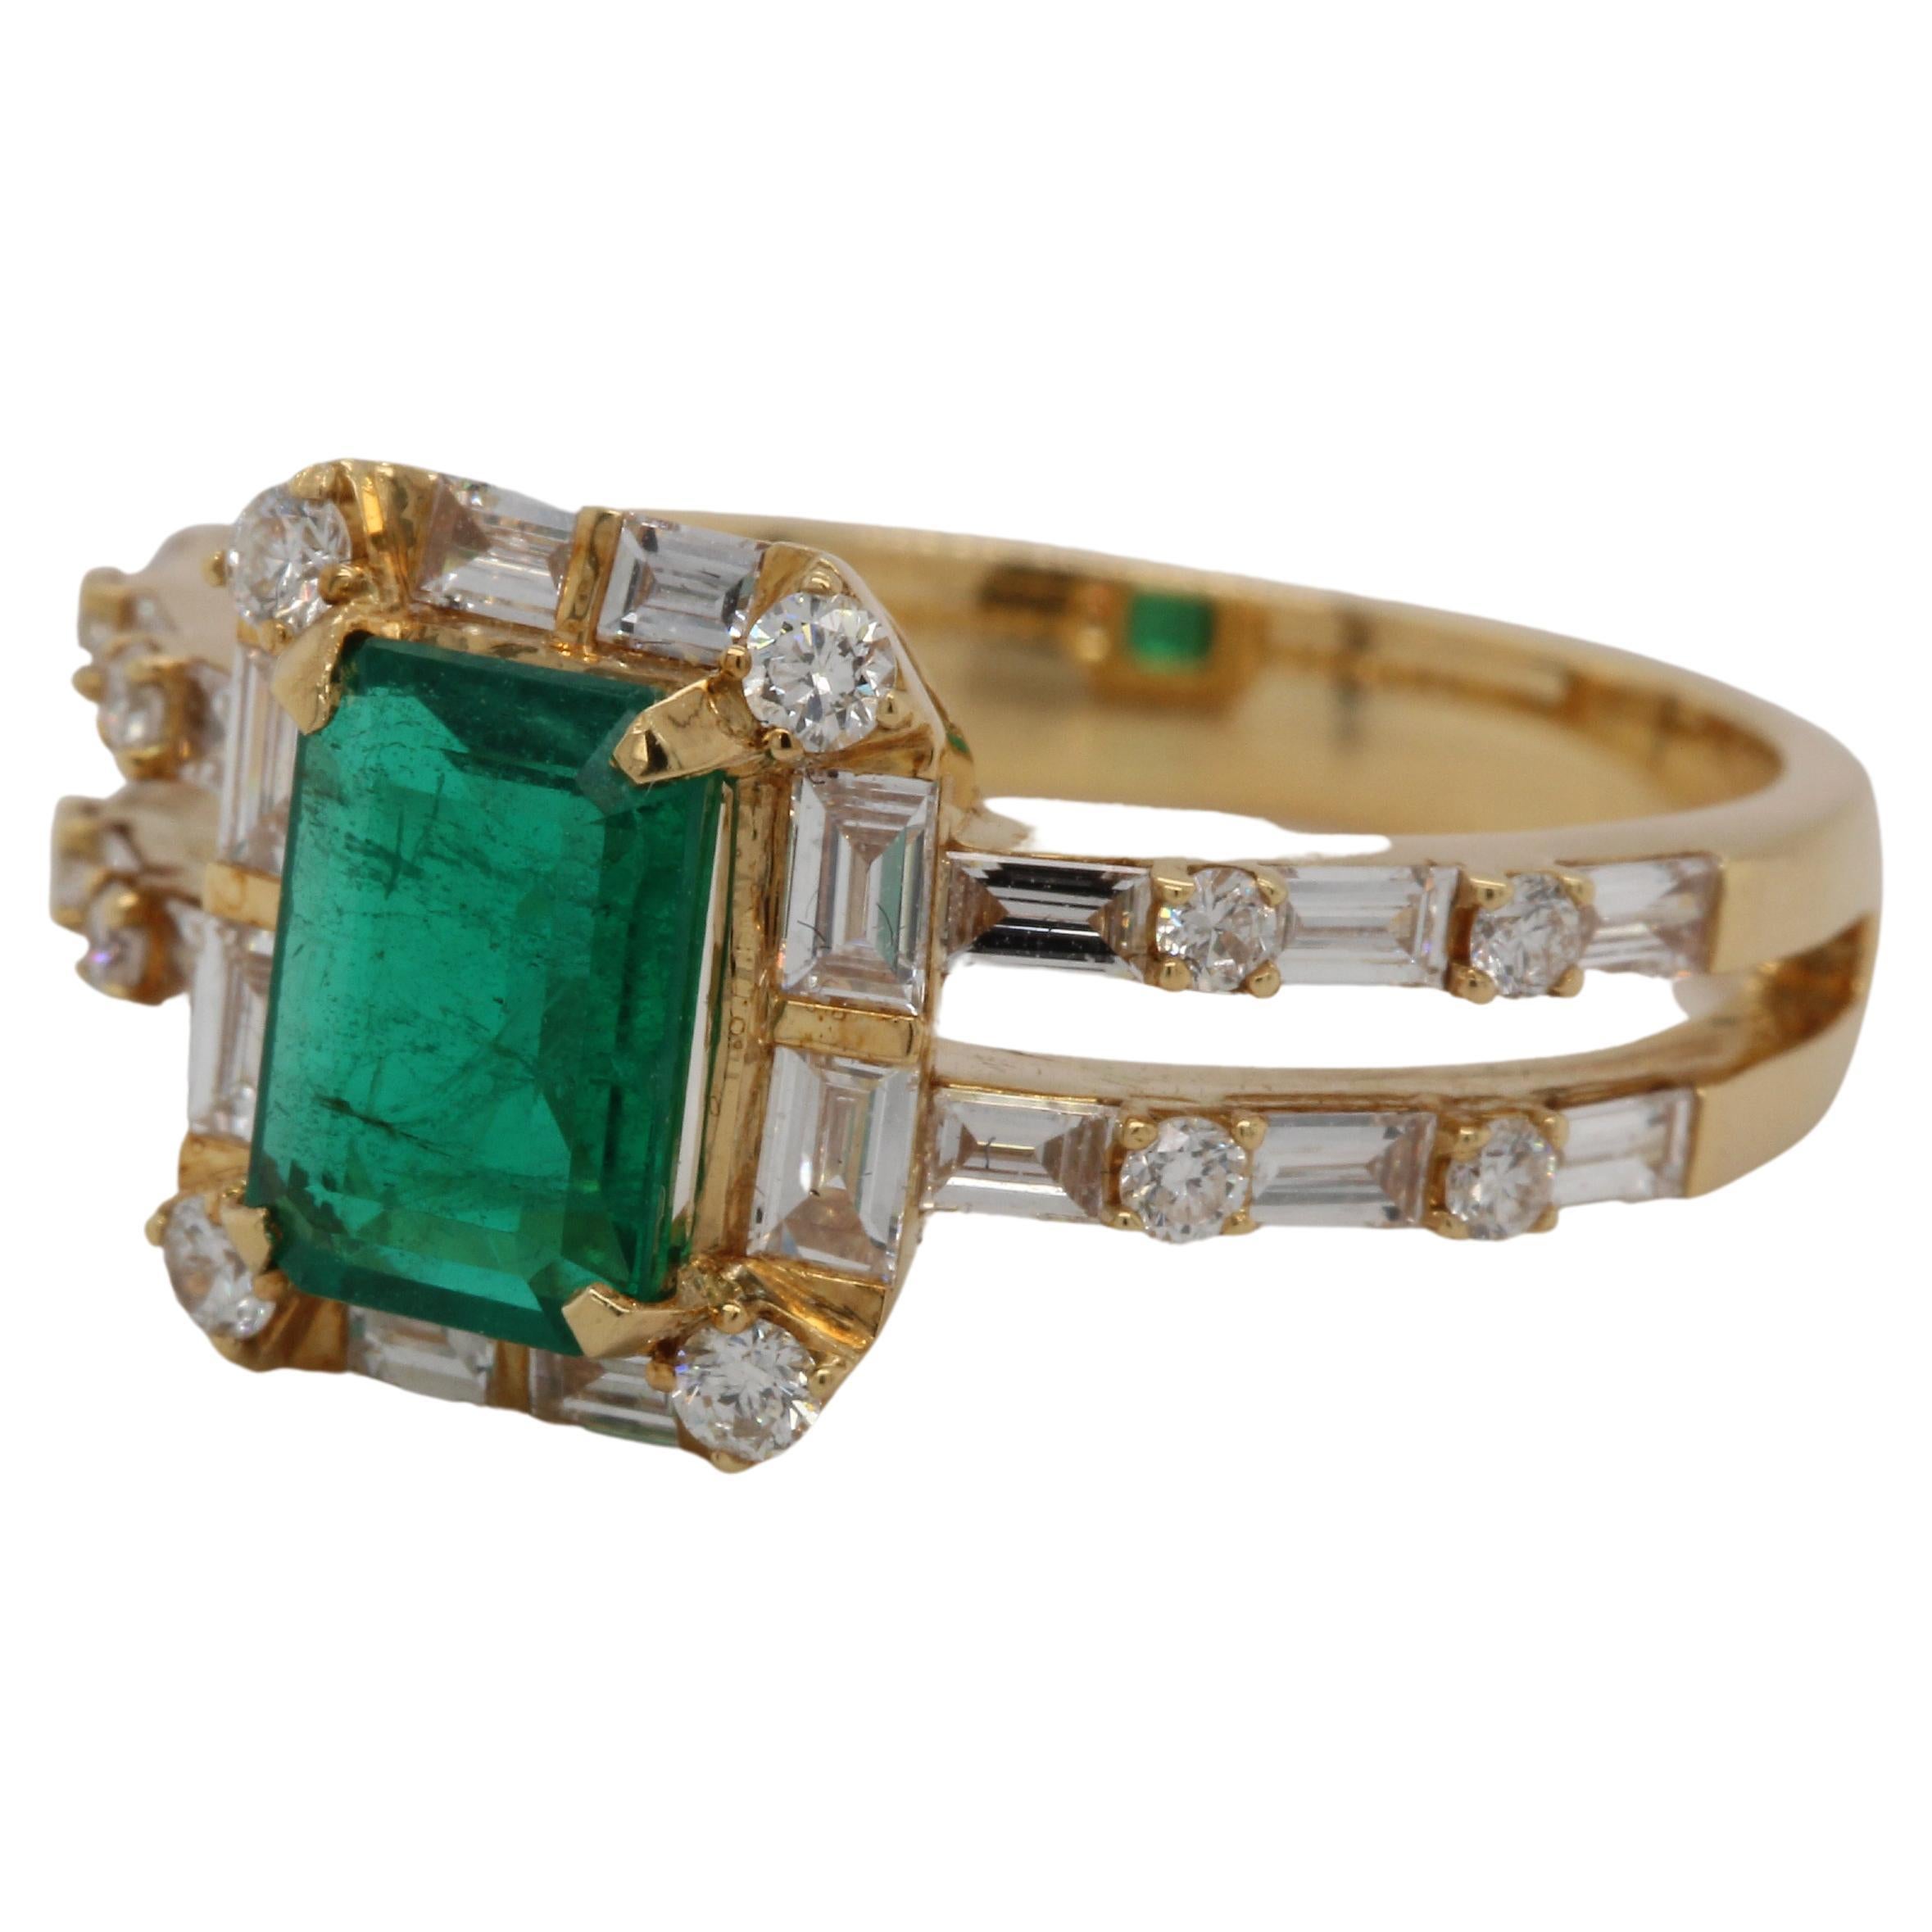 Emerald Cut 1.04 Carat Emerald and Diamond Solitaire Ring in 18 Karat Gold For Sale